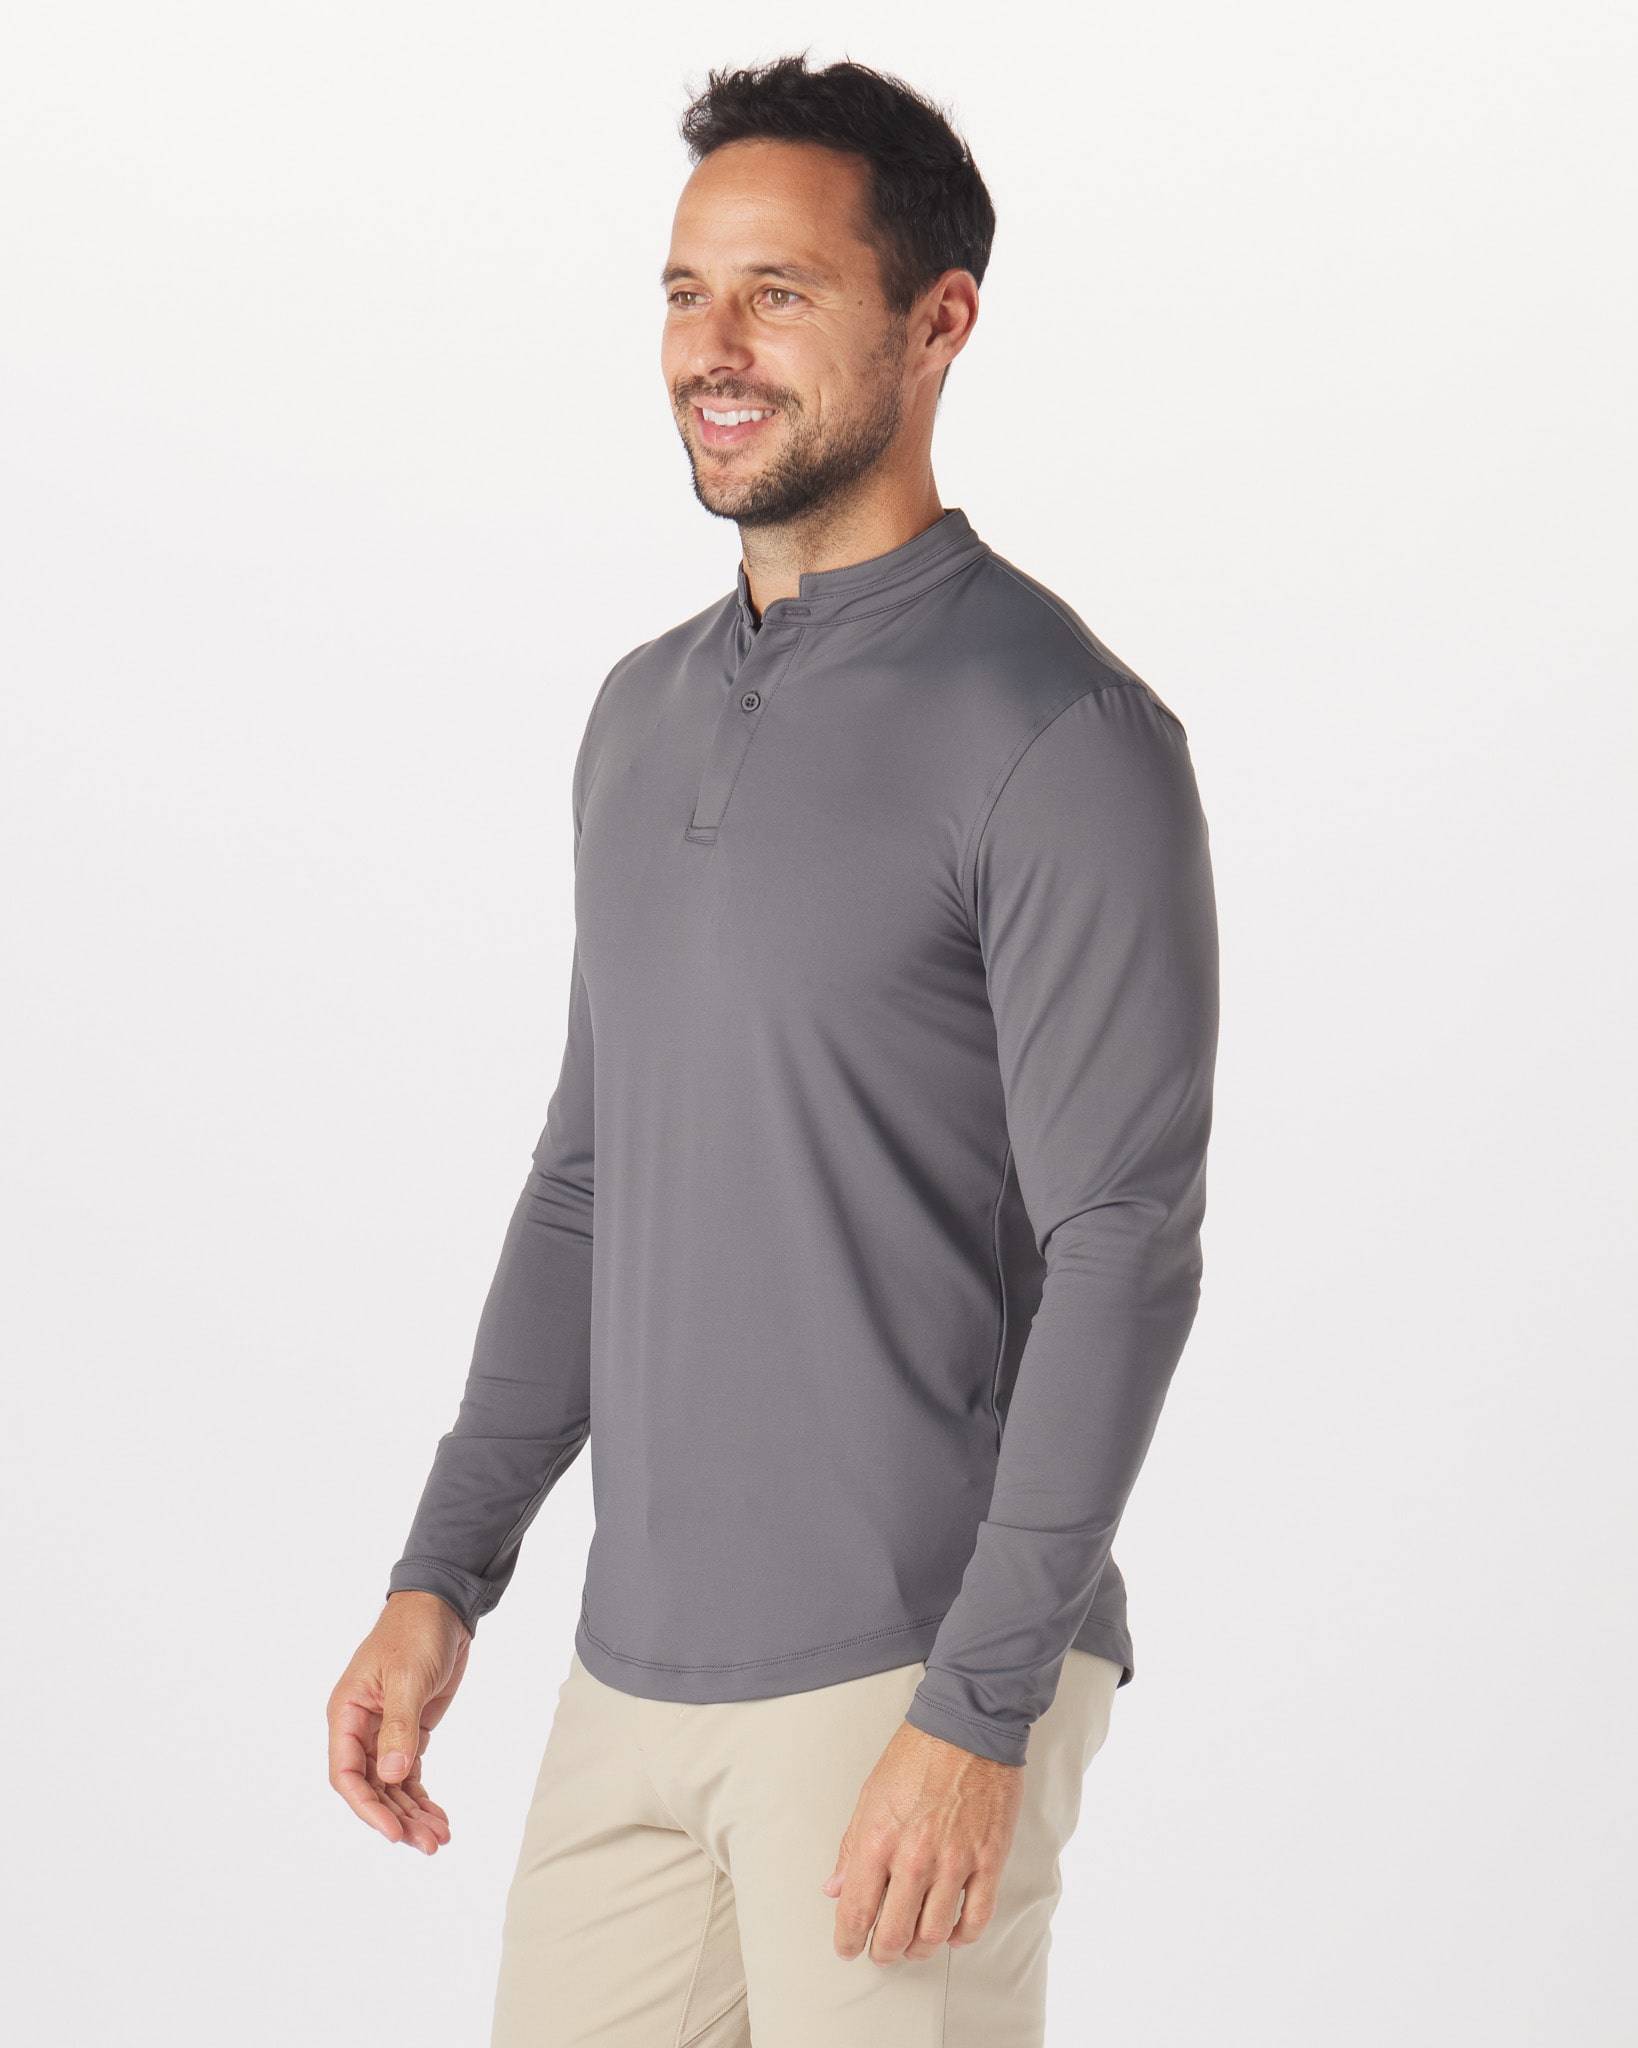 CATALYST POLO L/S - MANTRA COLLAR - VOLCANIC ASH color selector